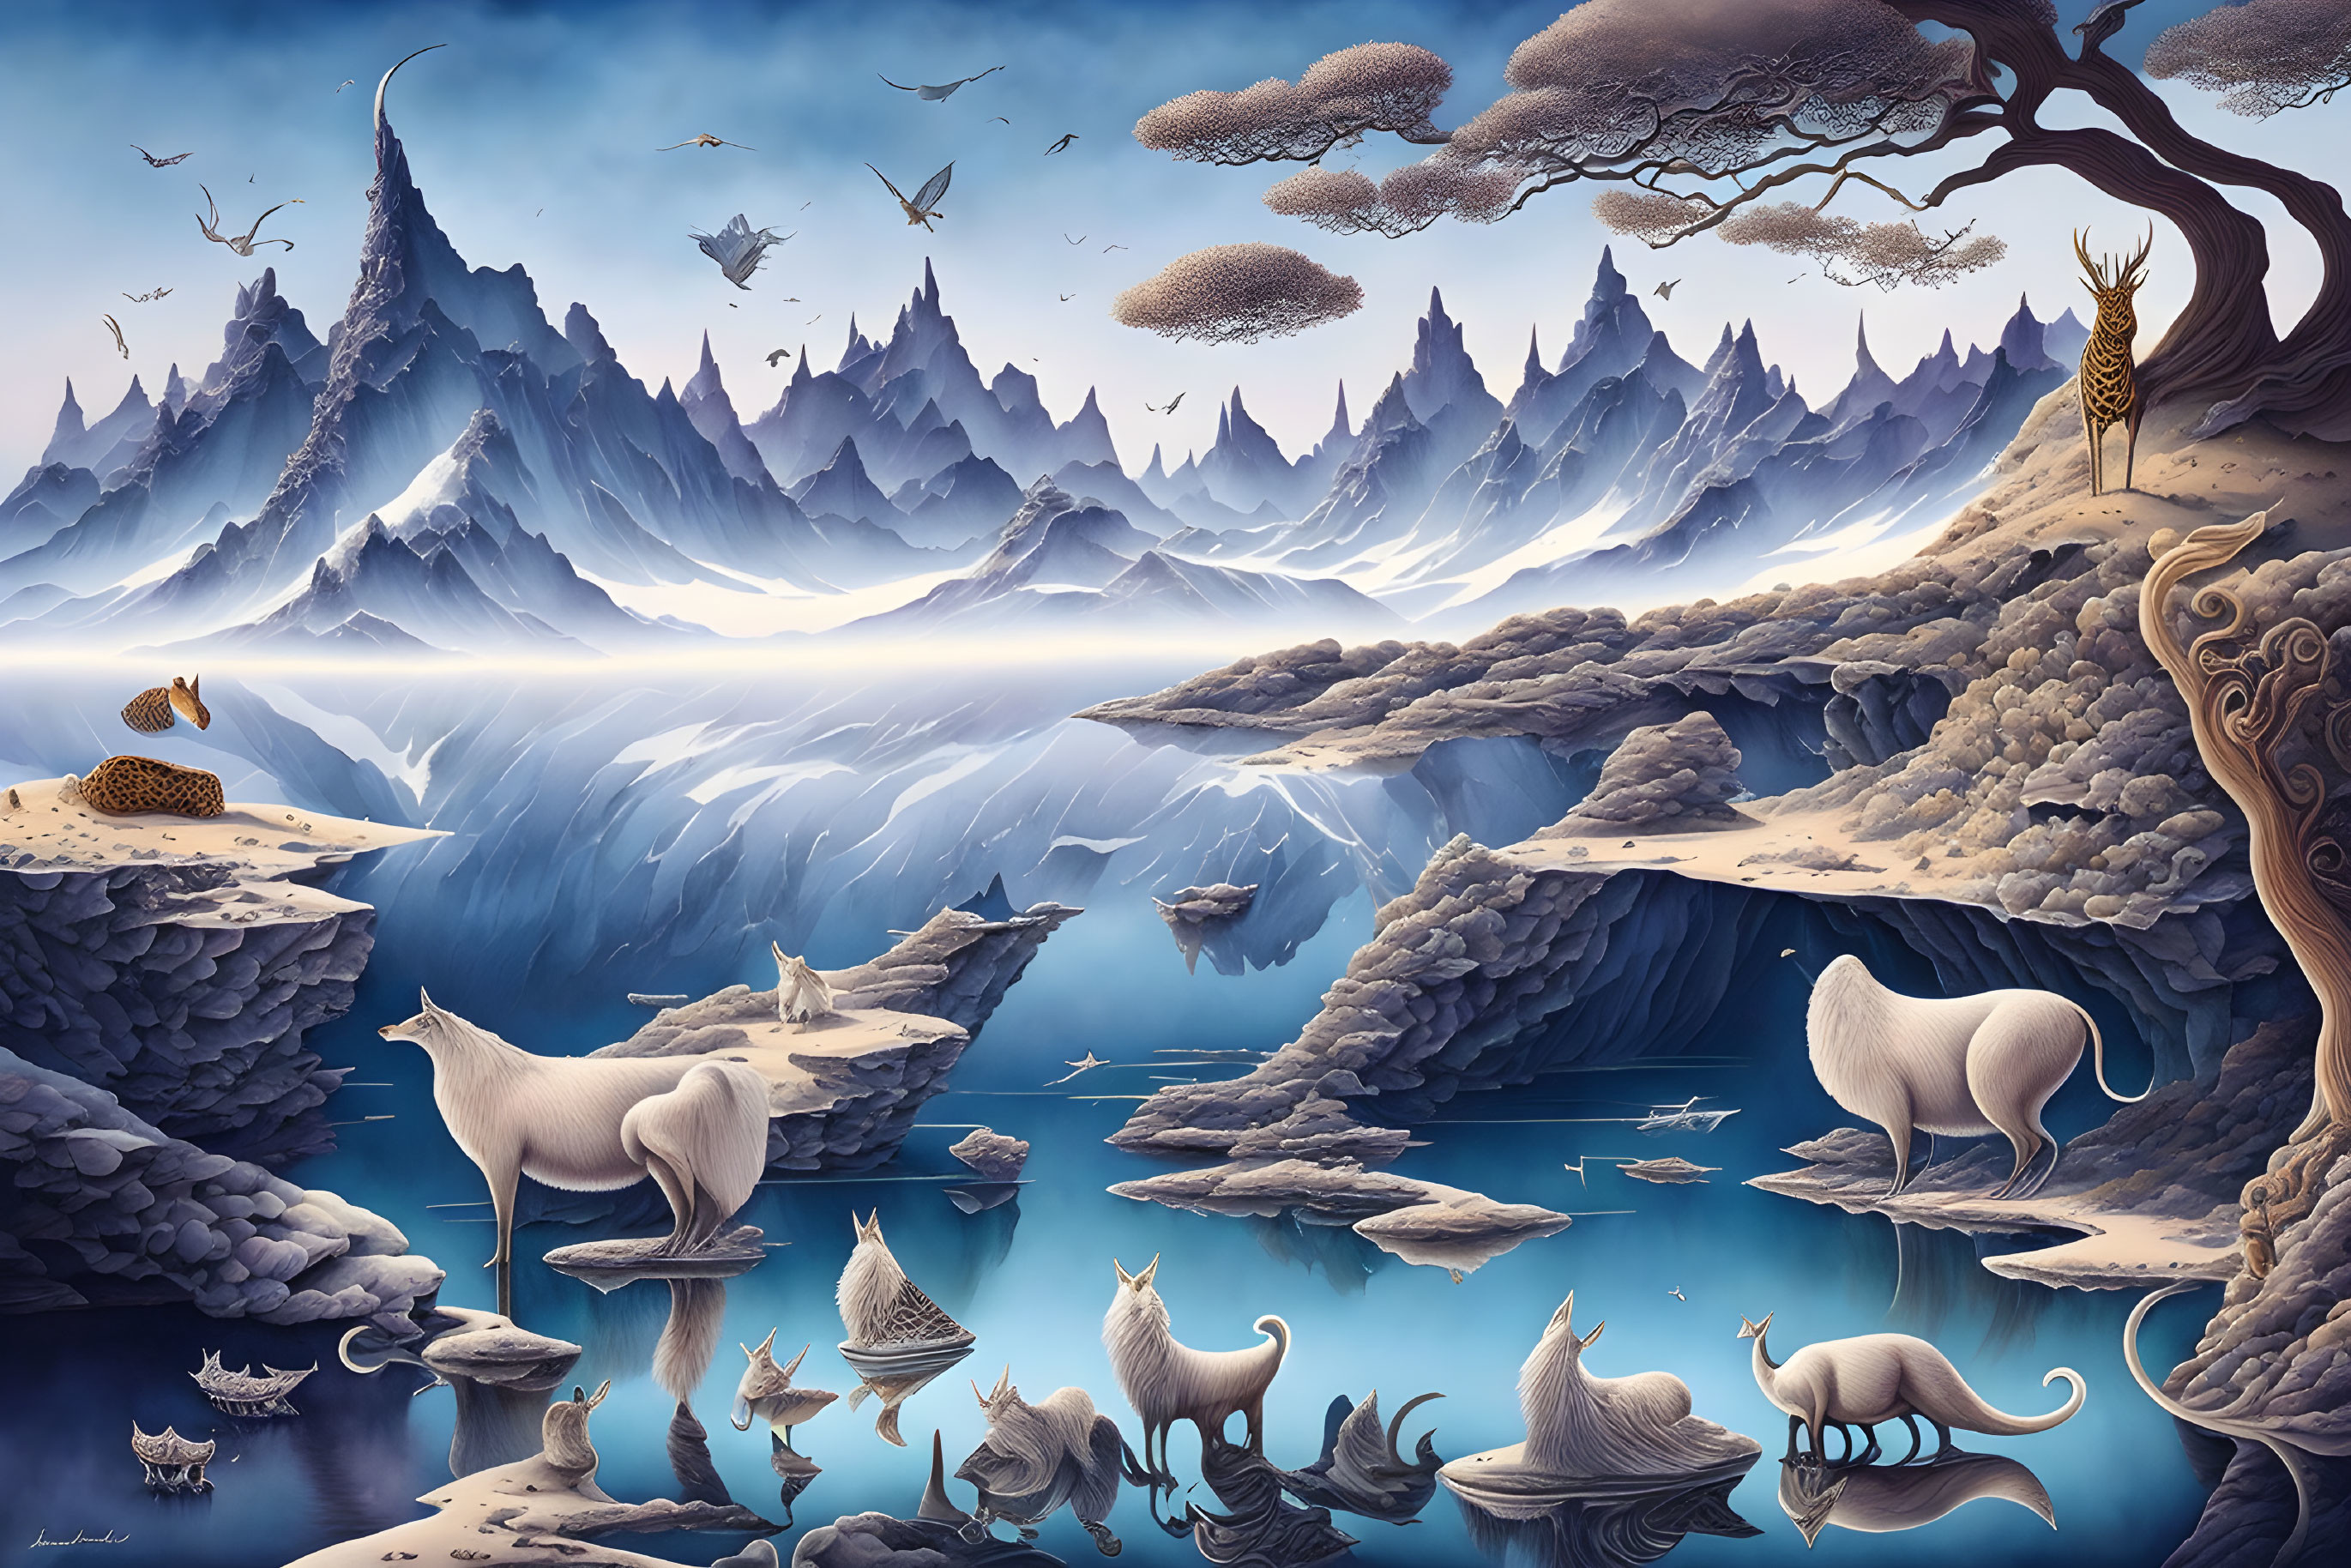 Surreal landscape with white creatures, floating islands, human-faced tree